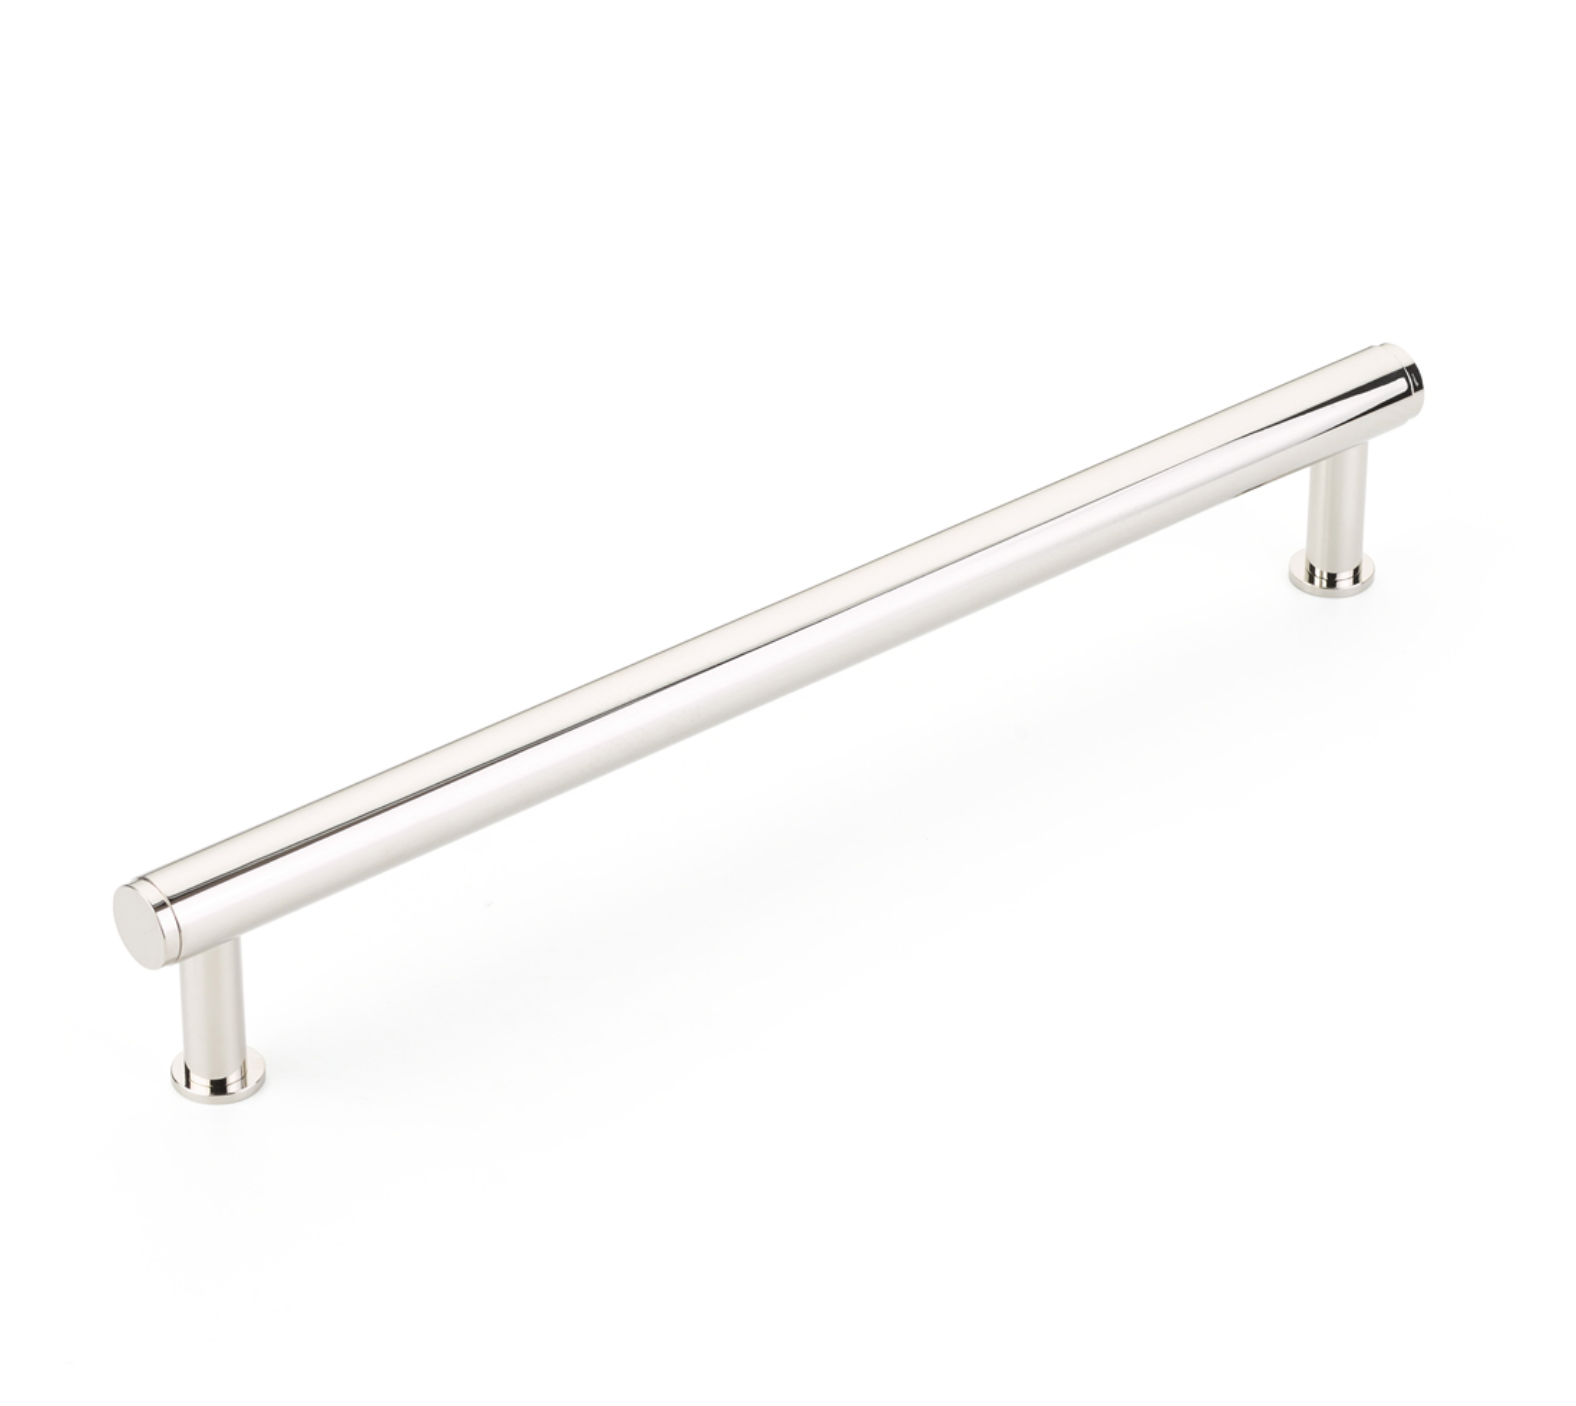 Polished Nickel "Maison No. 2" Smooth Drawer Pulls and Cabinet Knobs with Optional Backplate - Industry Hardware